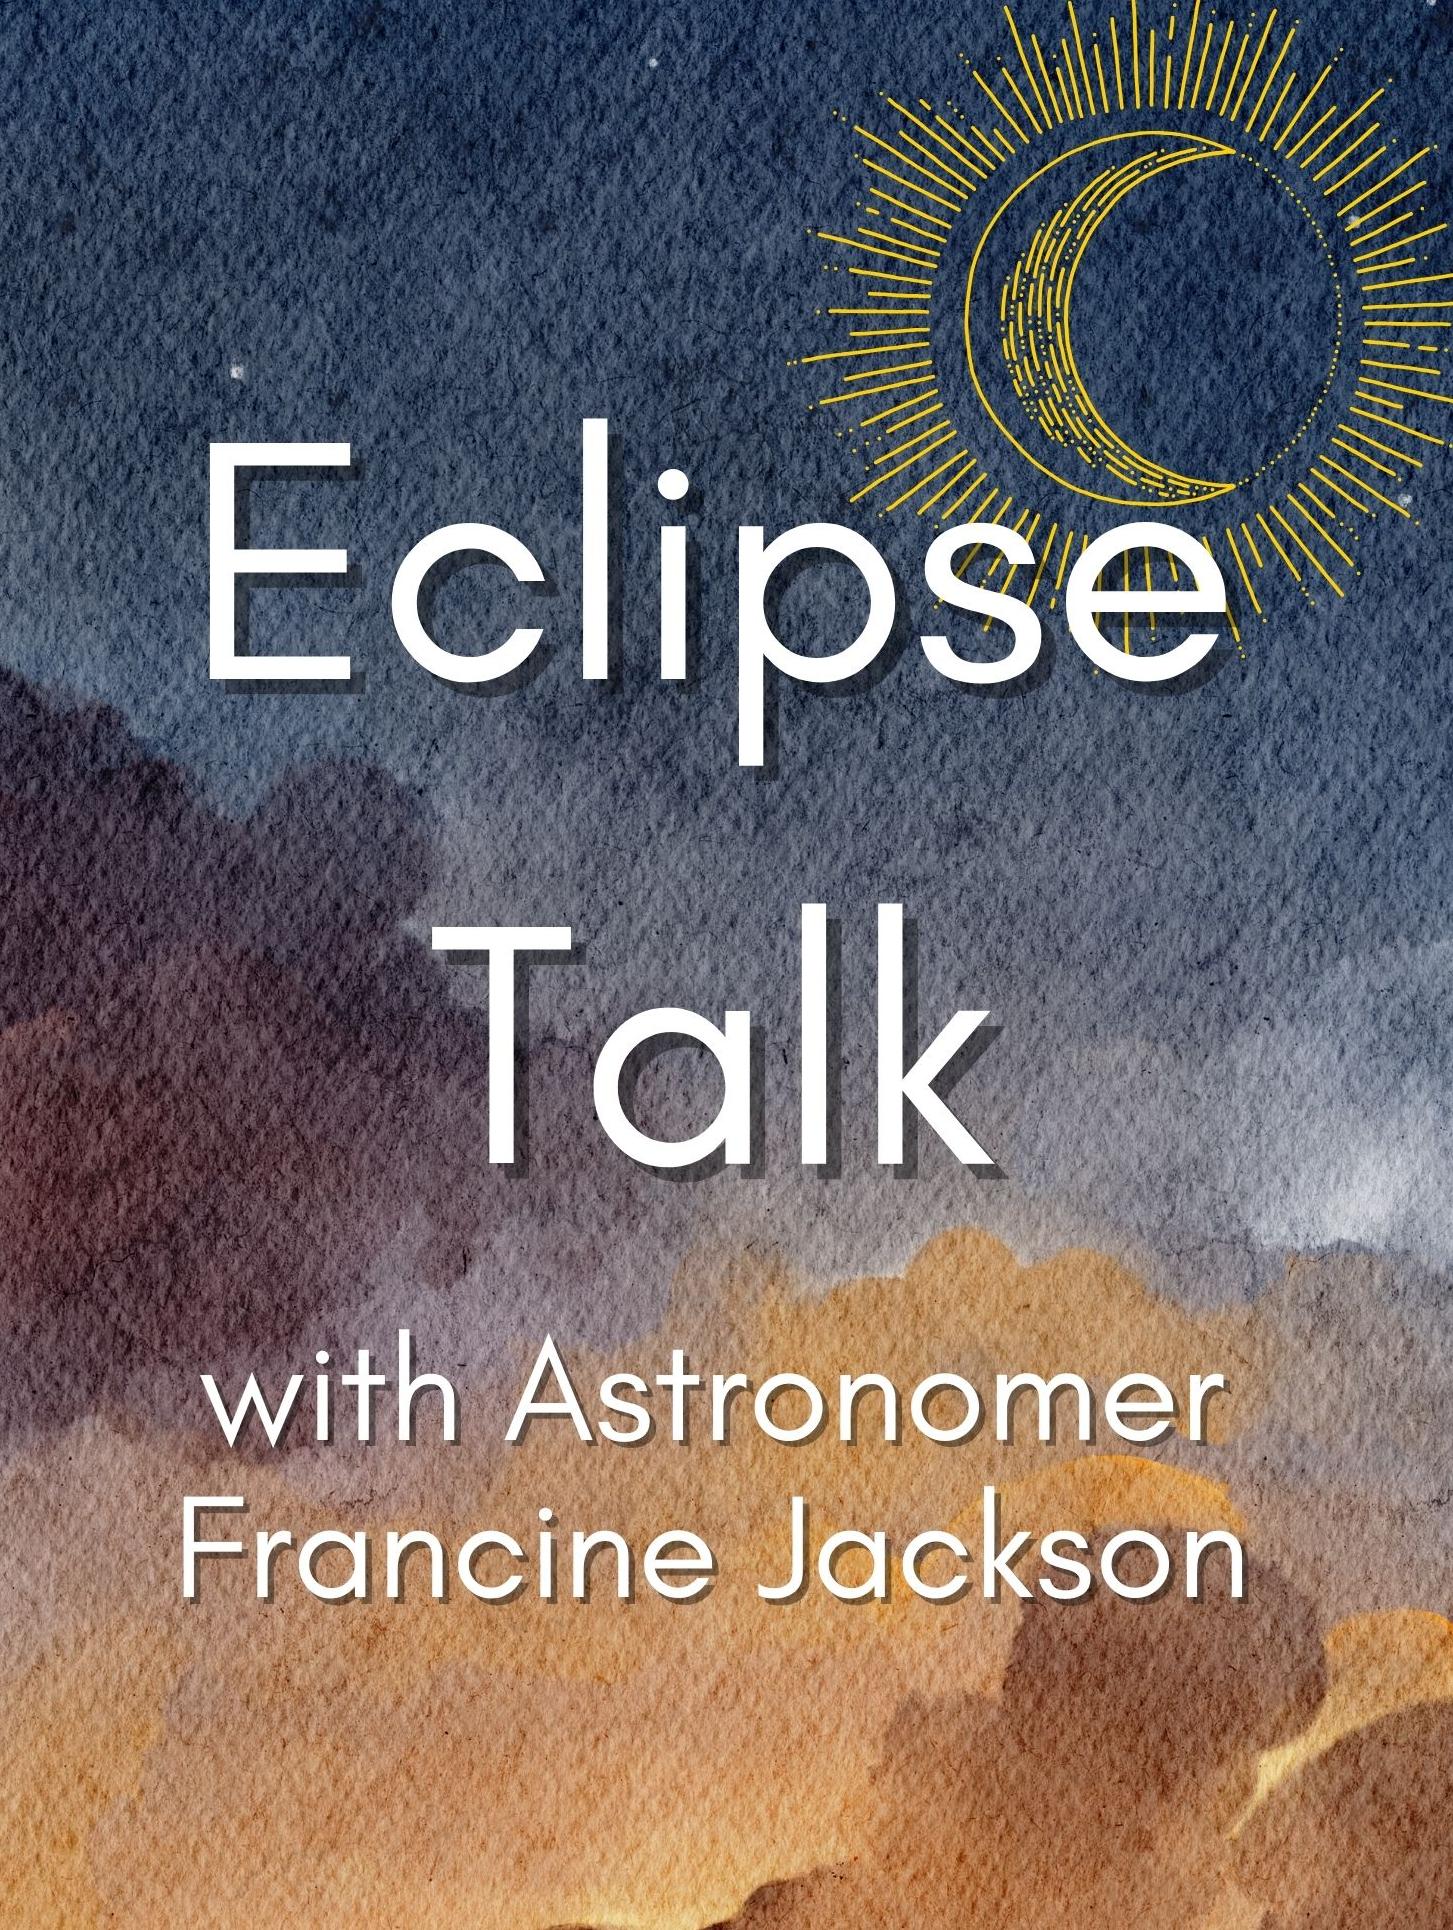 Dark sky with text: Eclipse Talk with Astronomer Francine Jackson